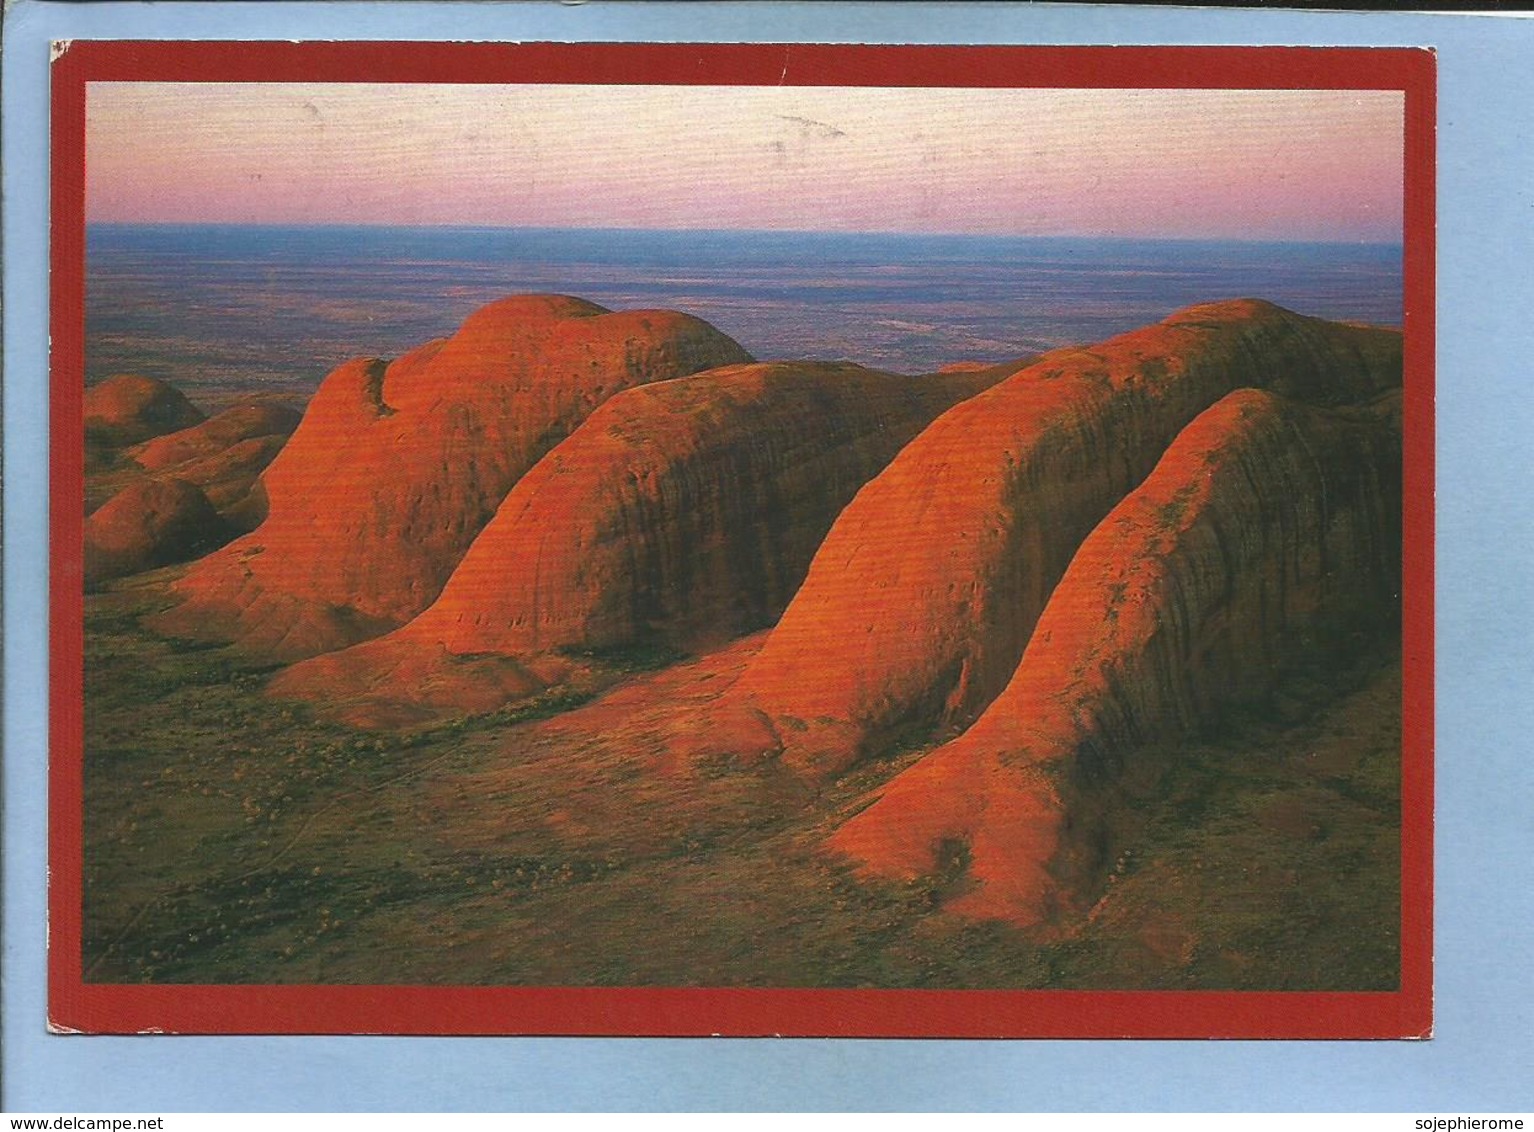 (Uluru &) The Olgas Like Nearby Ayers Rock Can Change Colours Dramatically At Sunset 2 Scans 19-10-1994 - Uluru & The Olgas